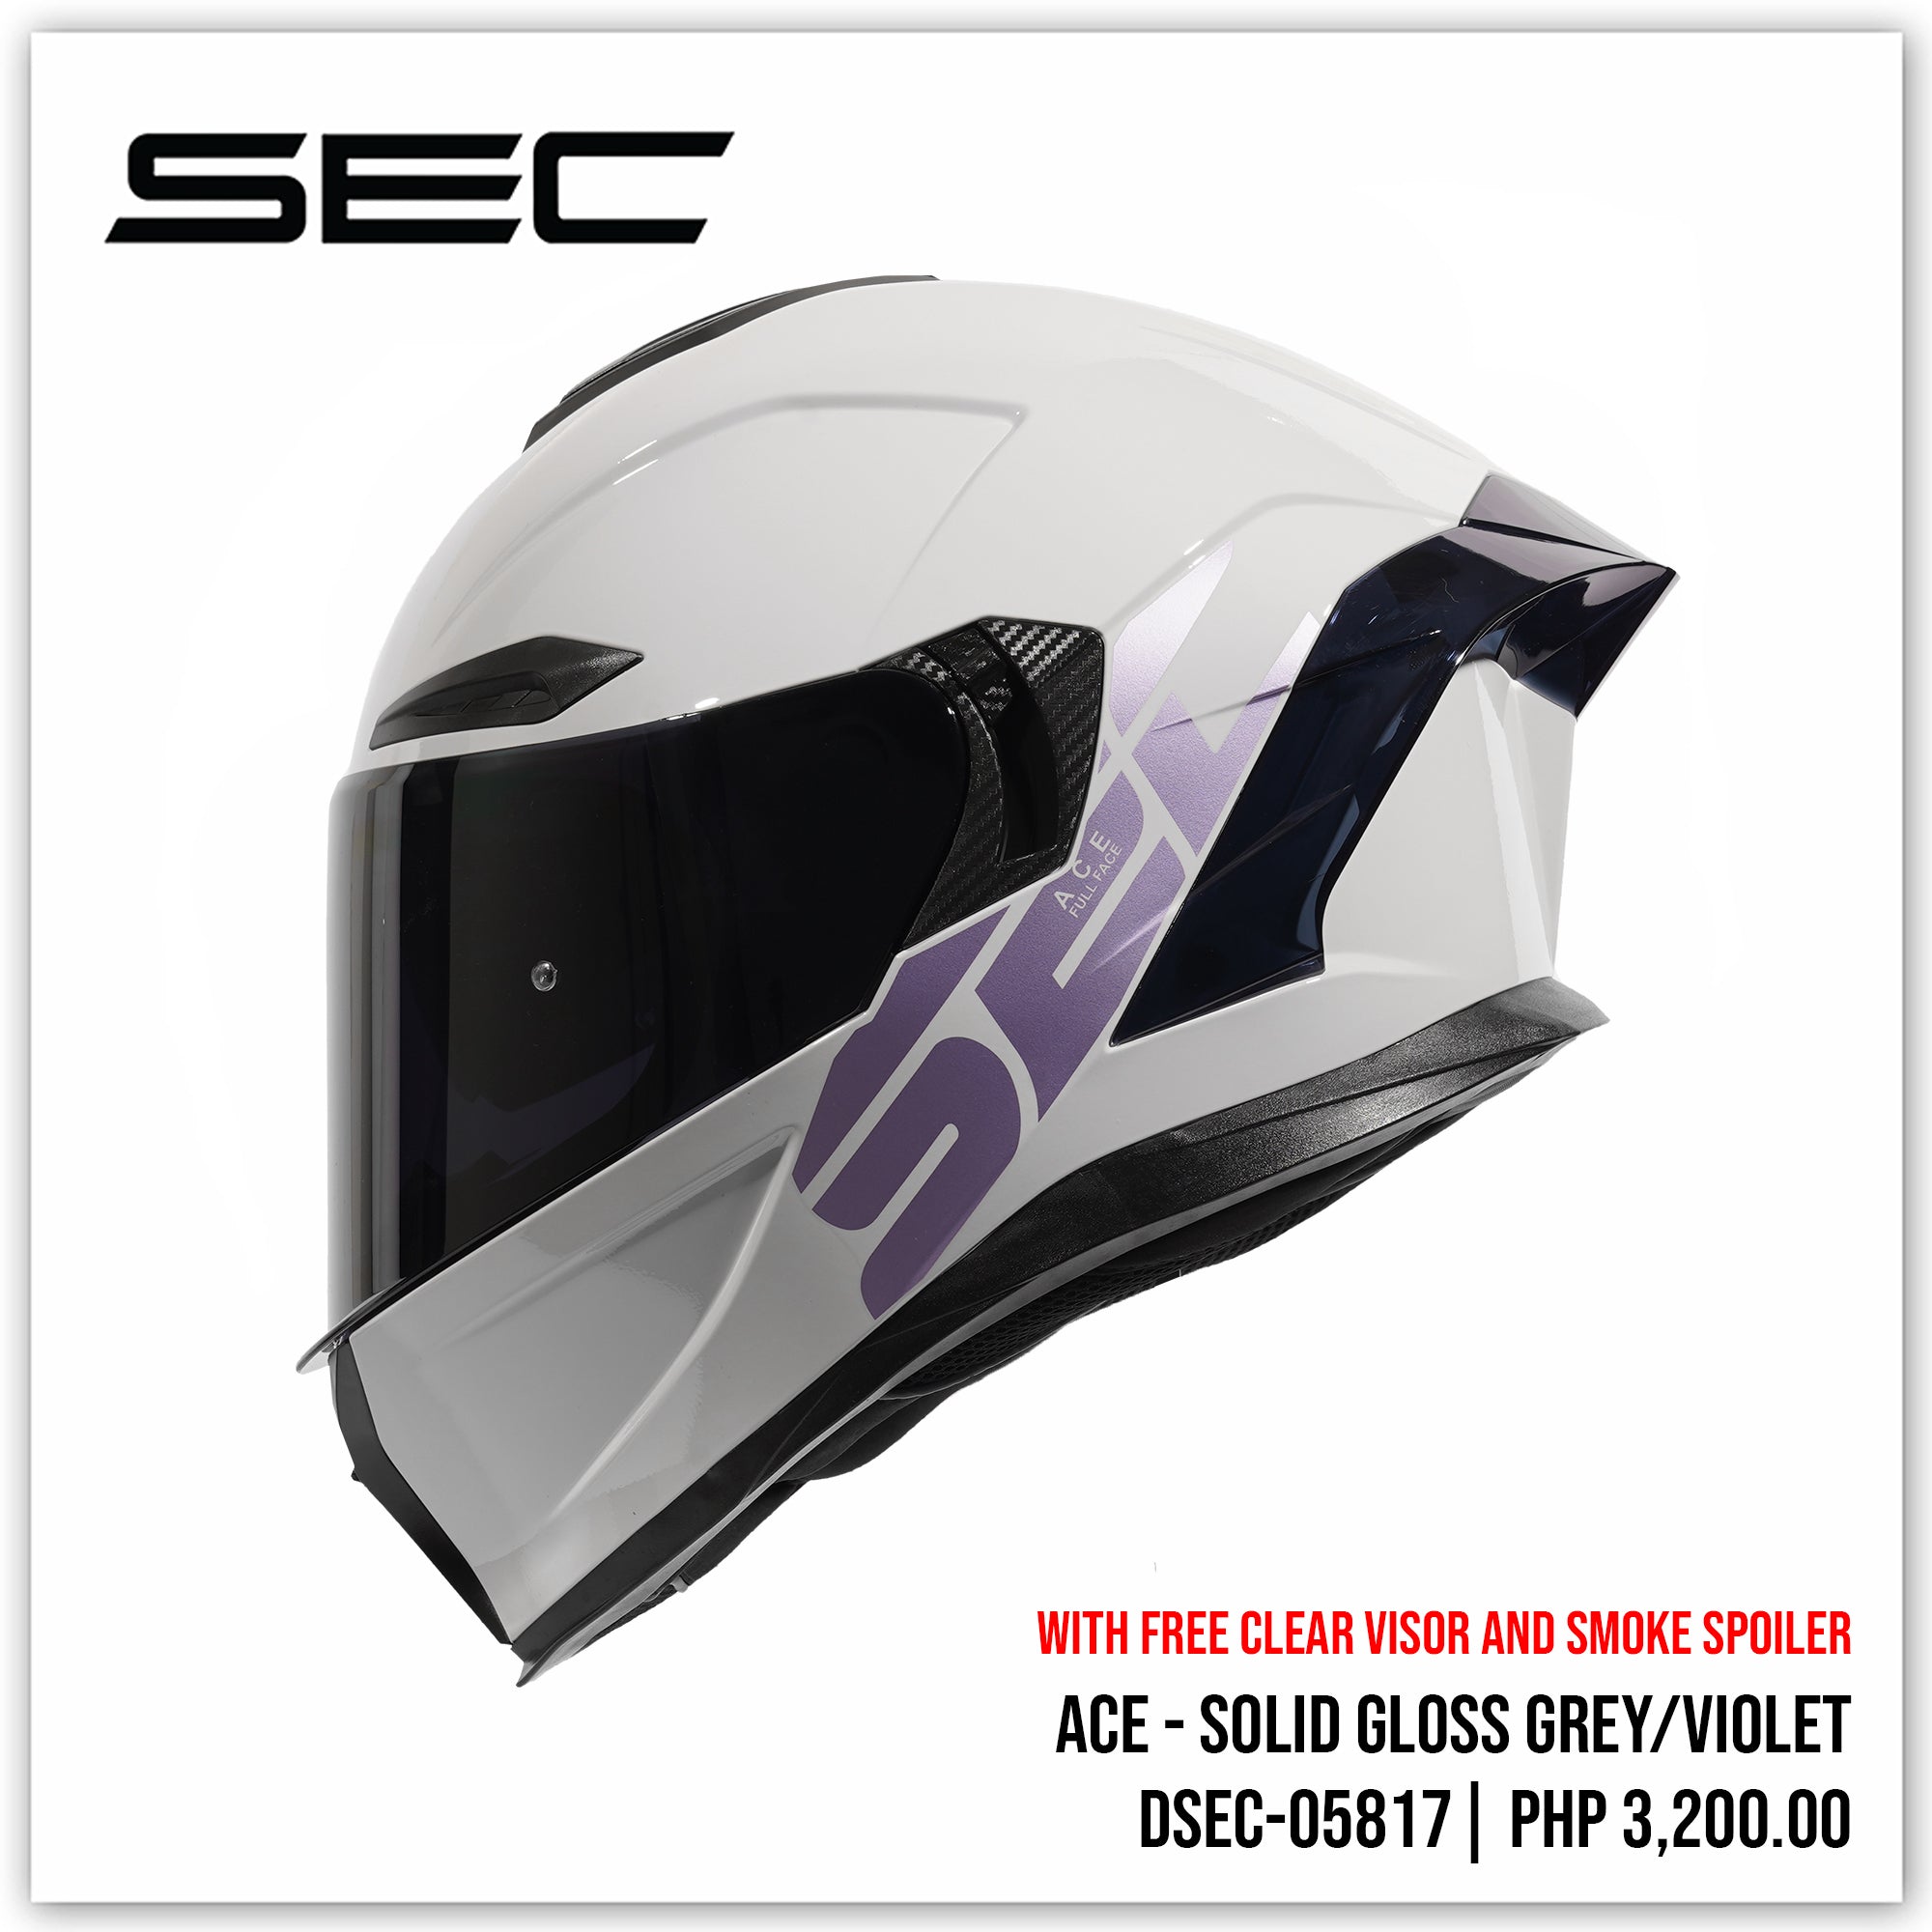 ACE - SOLID GLOSS GREY - VIOLET